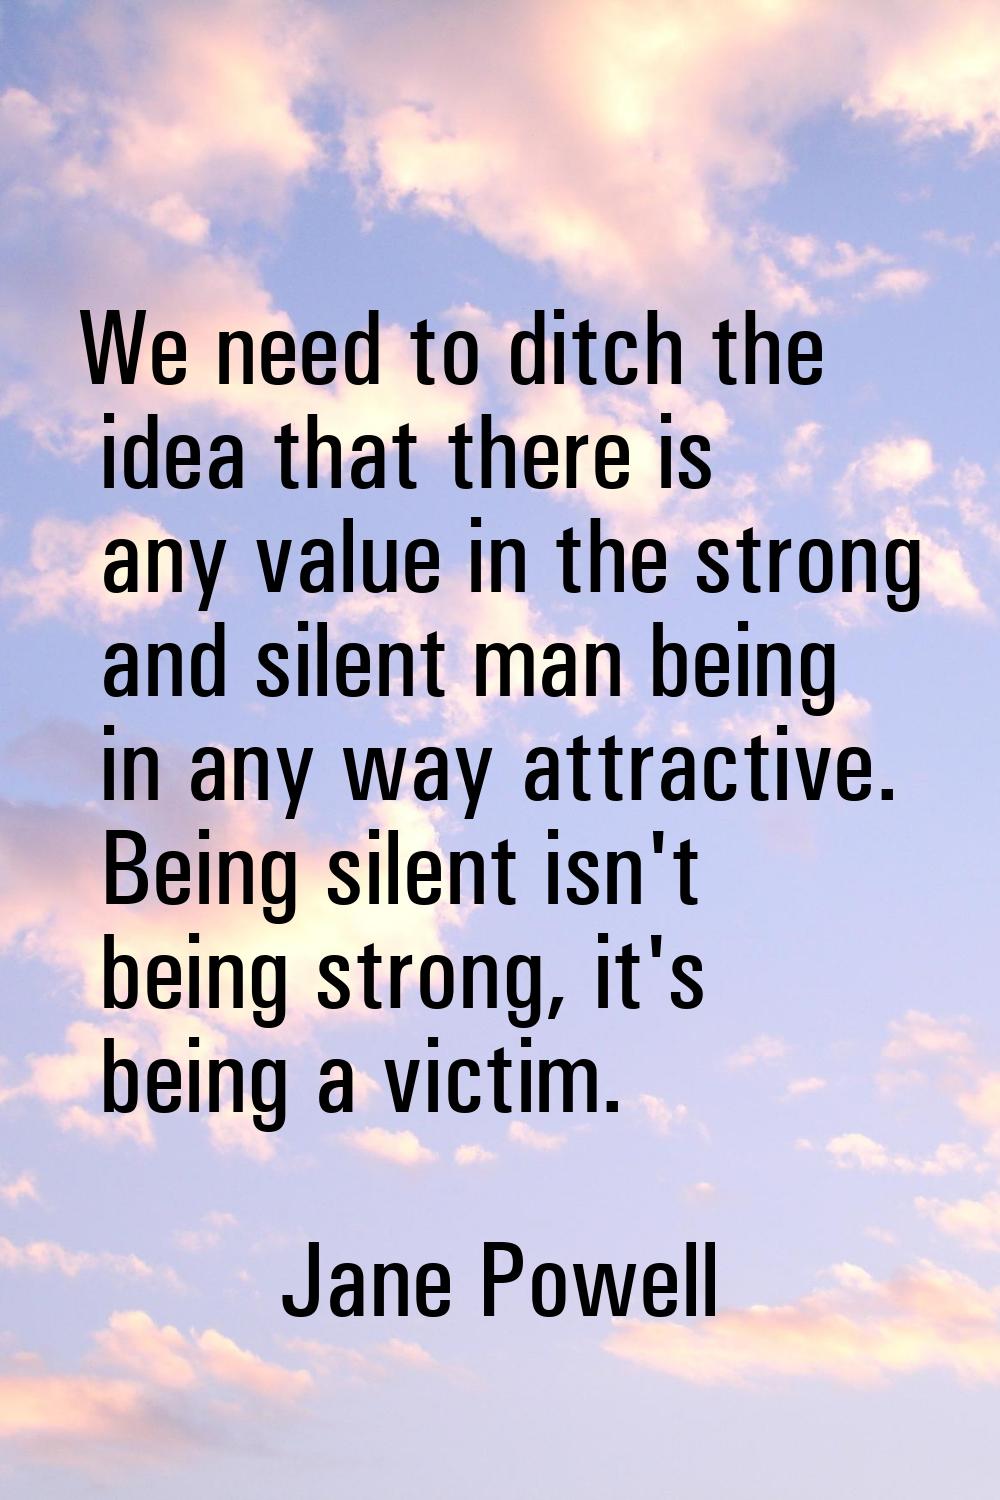 We need to ditch the idea that there is any value in the strong and silent man being in any way att